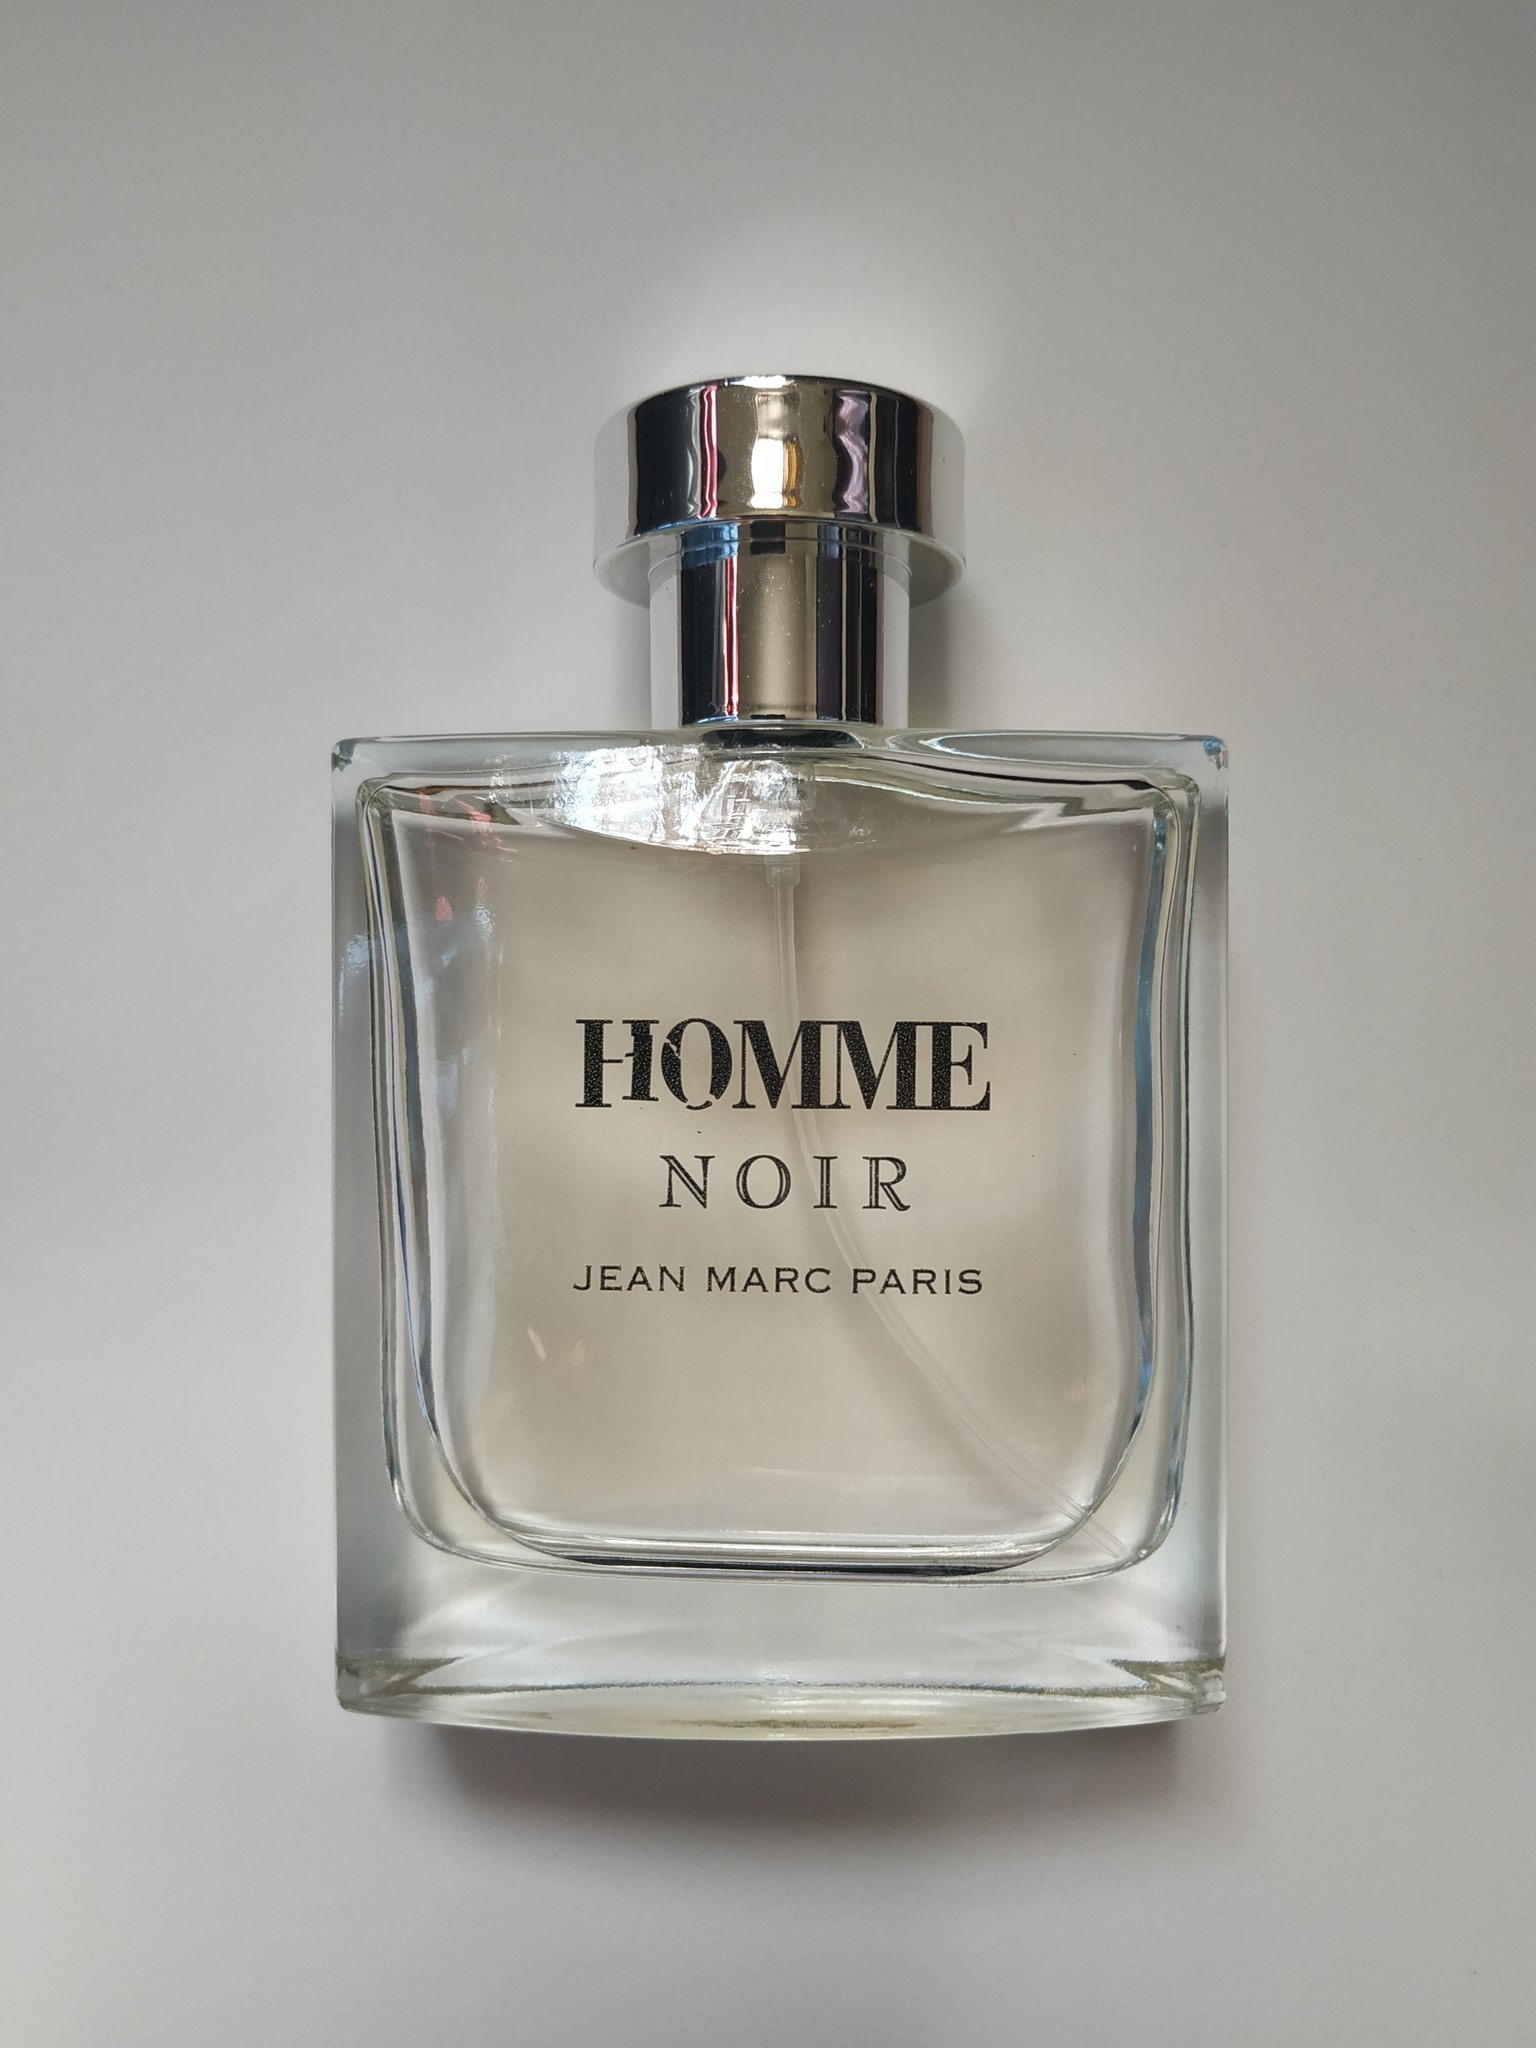 Webster Style on X: Scent of the day: Homme Noir by Jean Marc Paris  #sartorialandgeek #sartorialist #mensstyle #styleformen #stylish #gq # fragrance #cologne #fragrancehead #blackmenstyle #blackmenwithstyle  #fragrancecollector #beauty #love #fashion